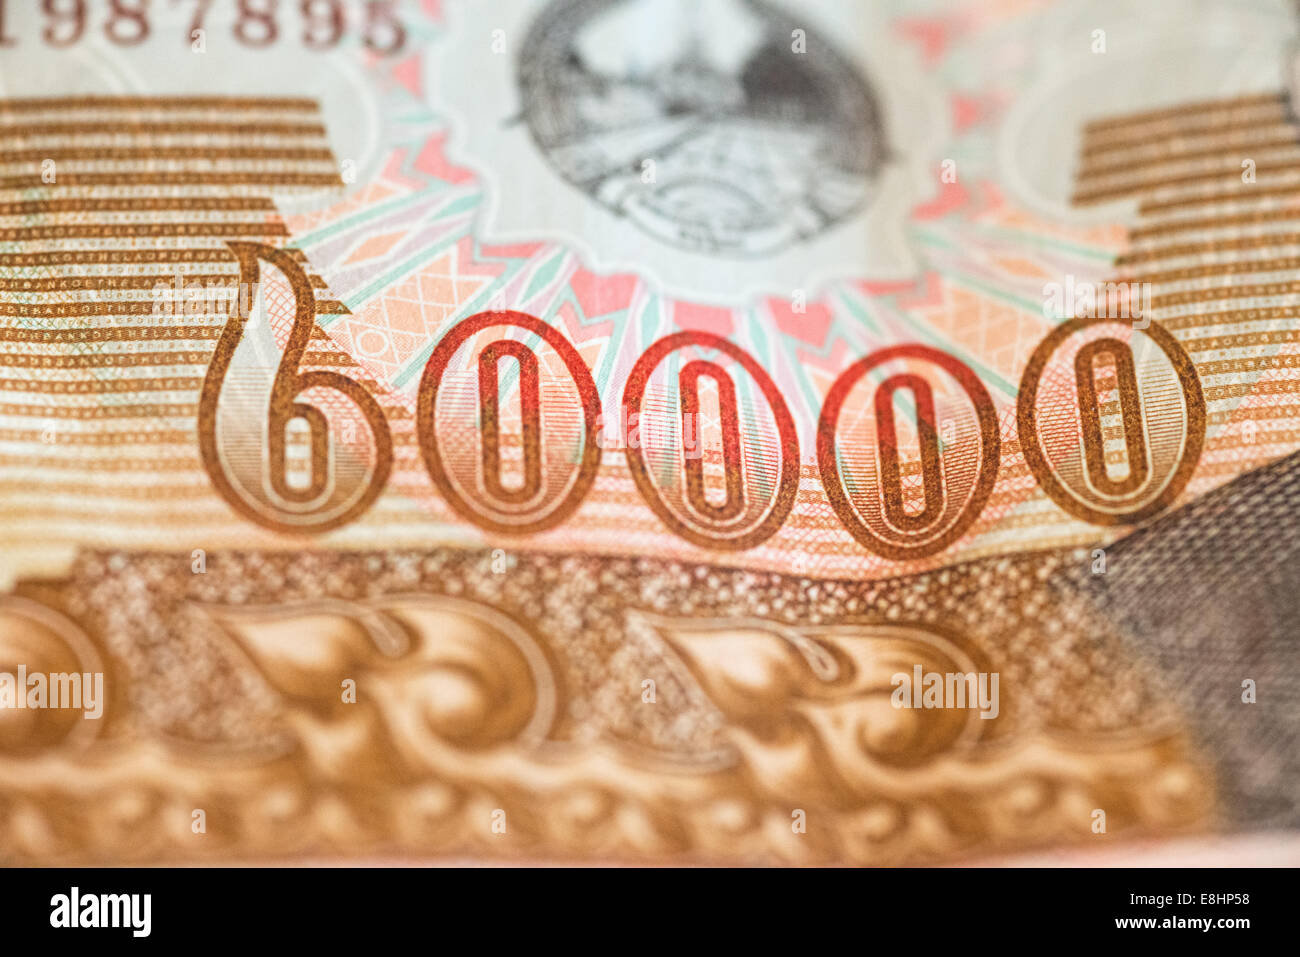 Close-up shots of the Lao paper currency, known as the kip. Stock Photo